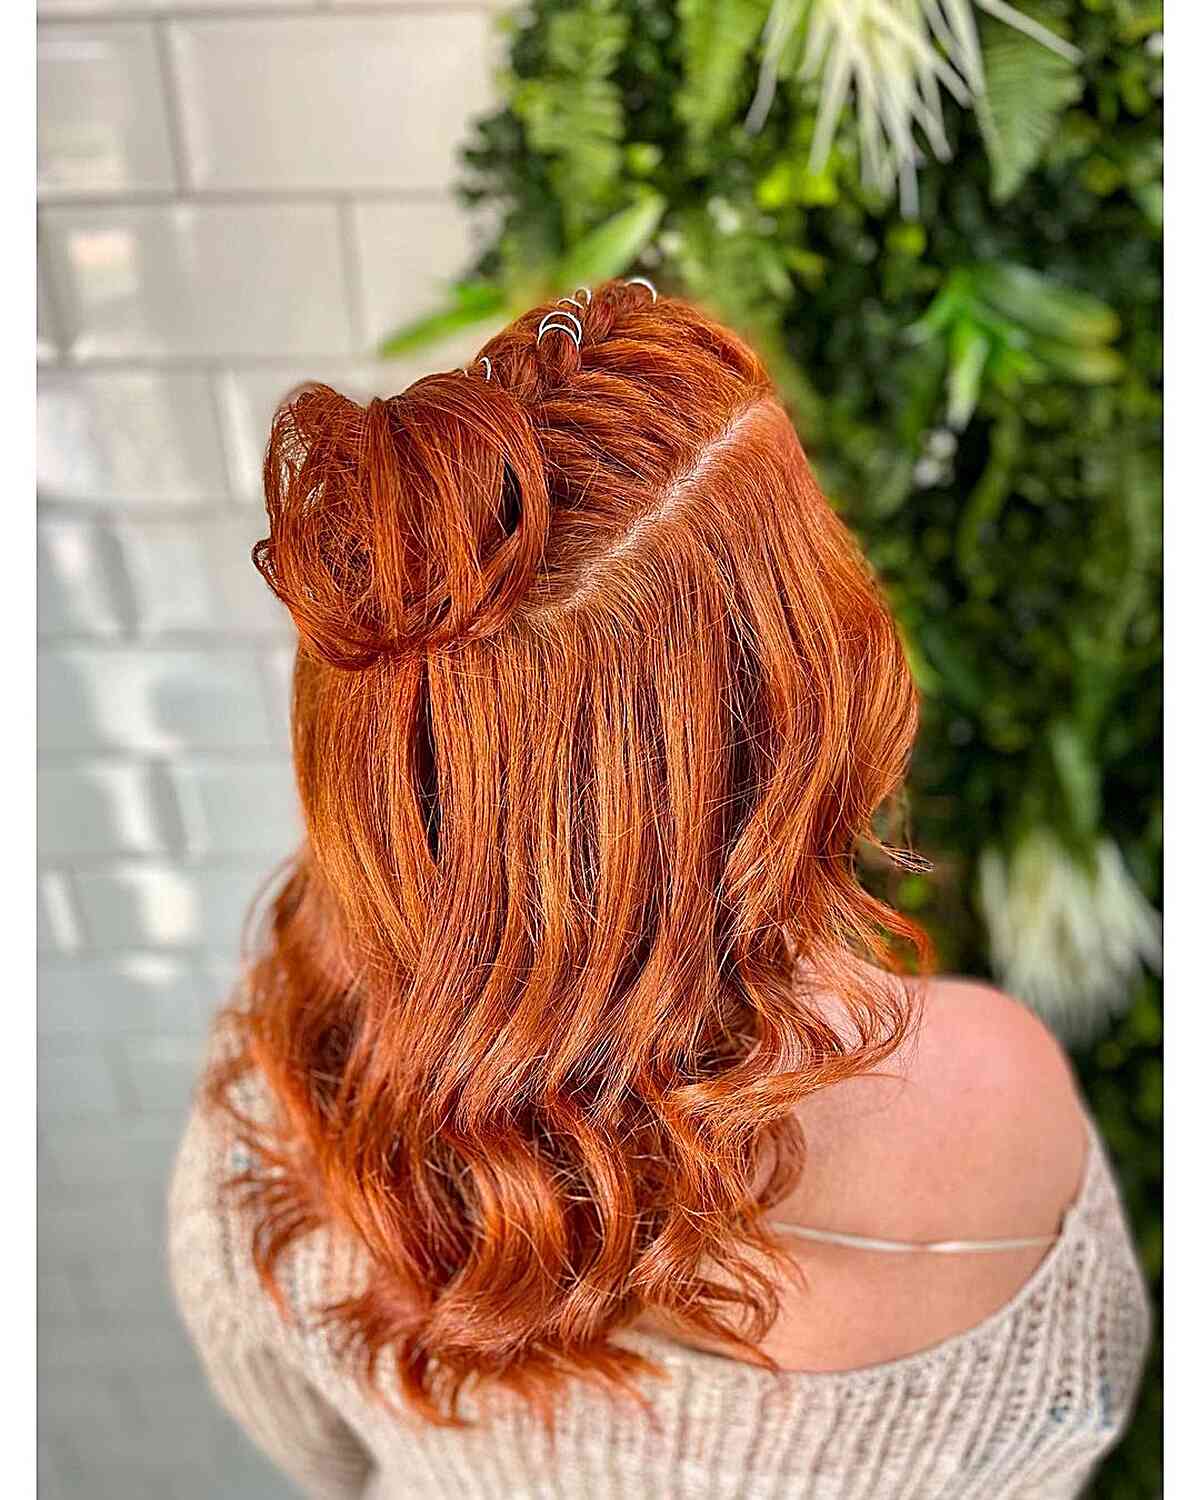 Mid-Length Bright Copper Hair with Top Braid for festivities